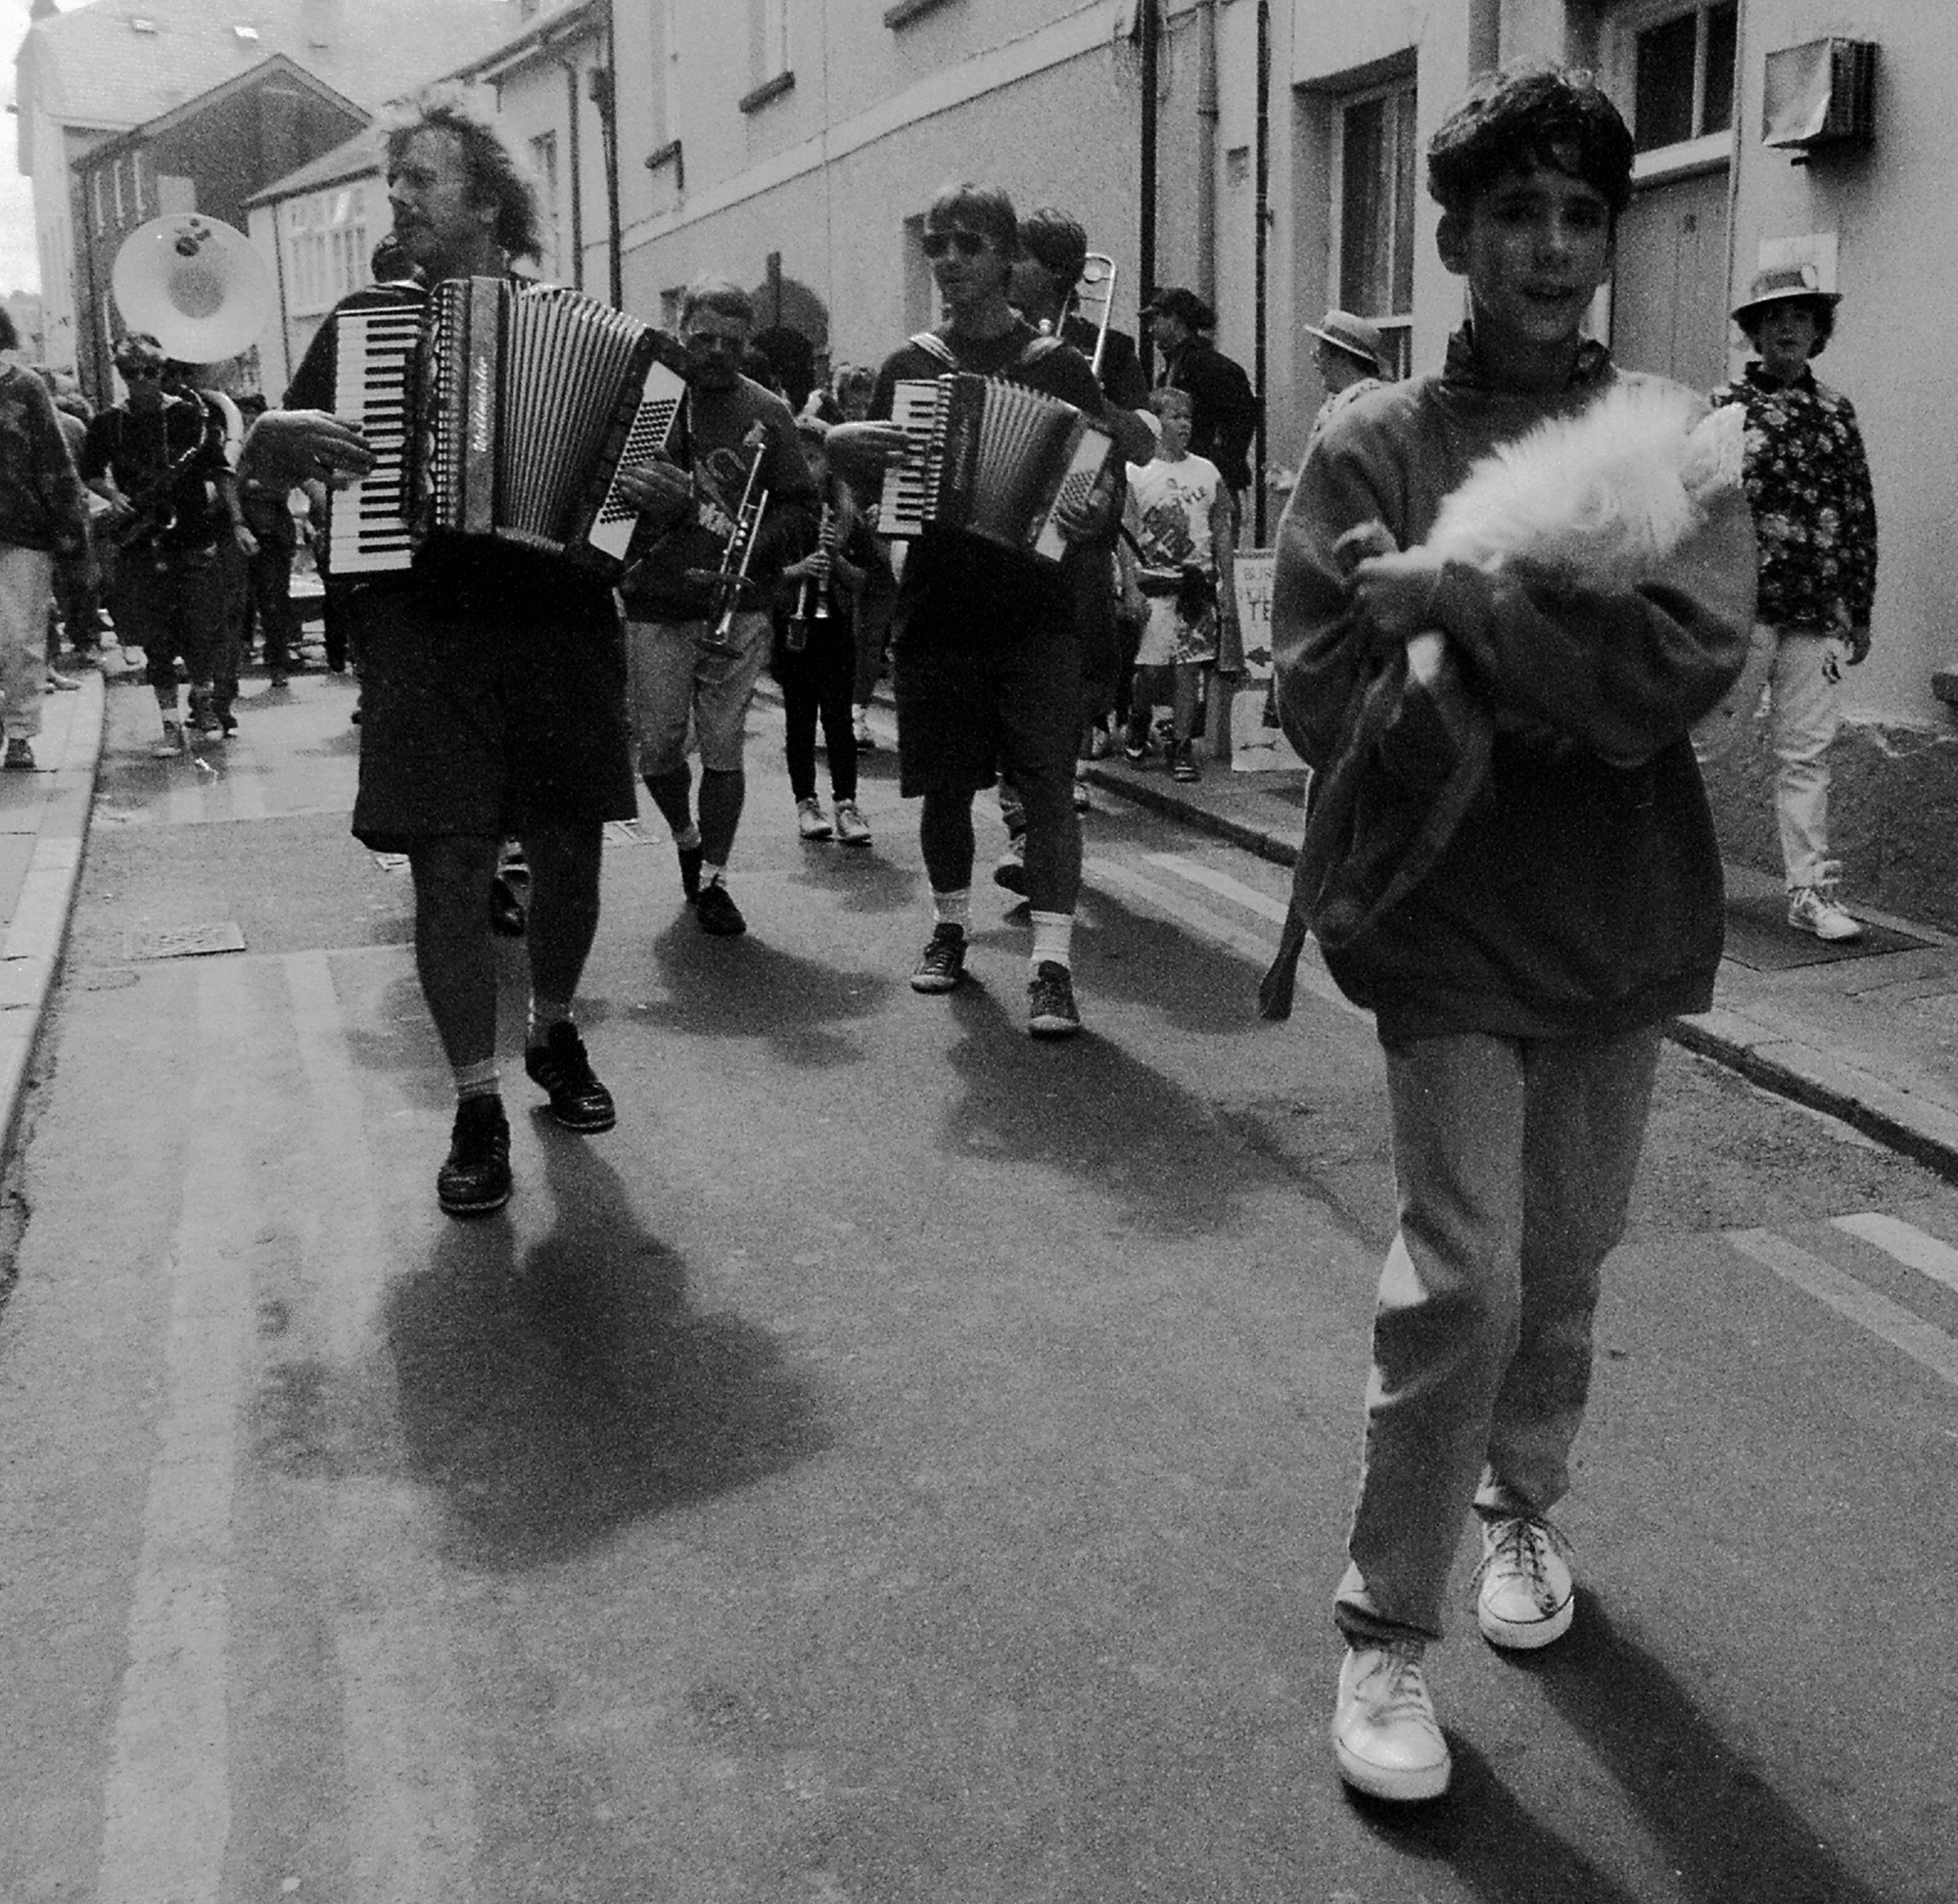 Image of accordion players in Brecon Jazz Festival parade